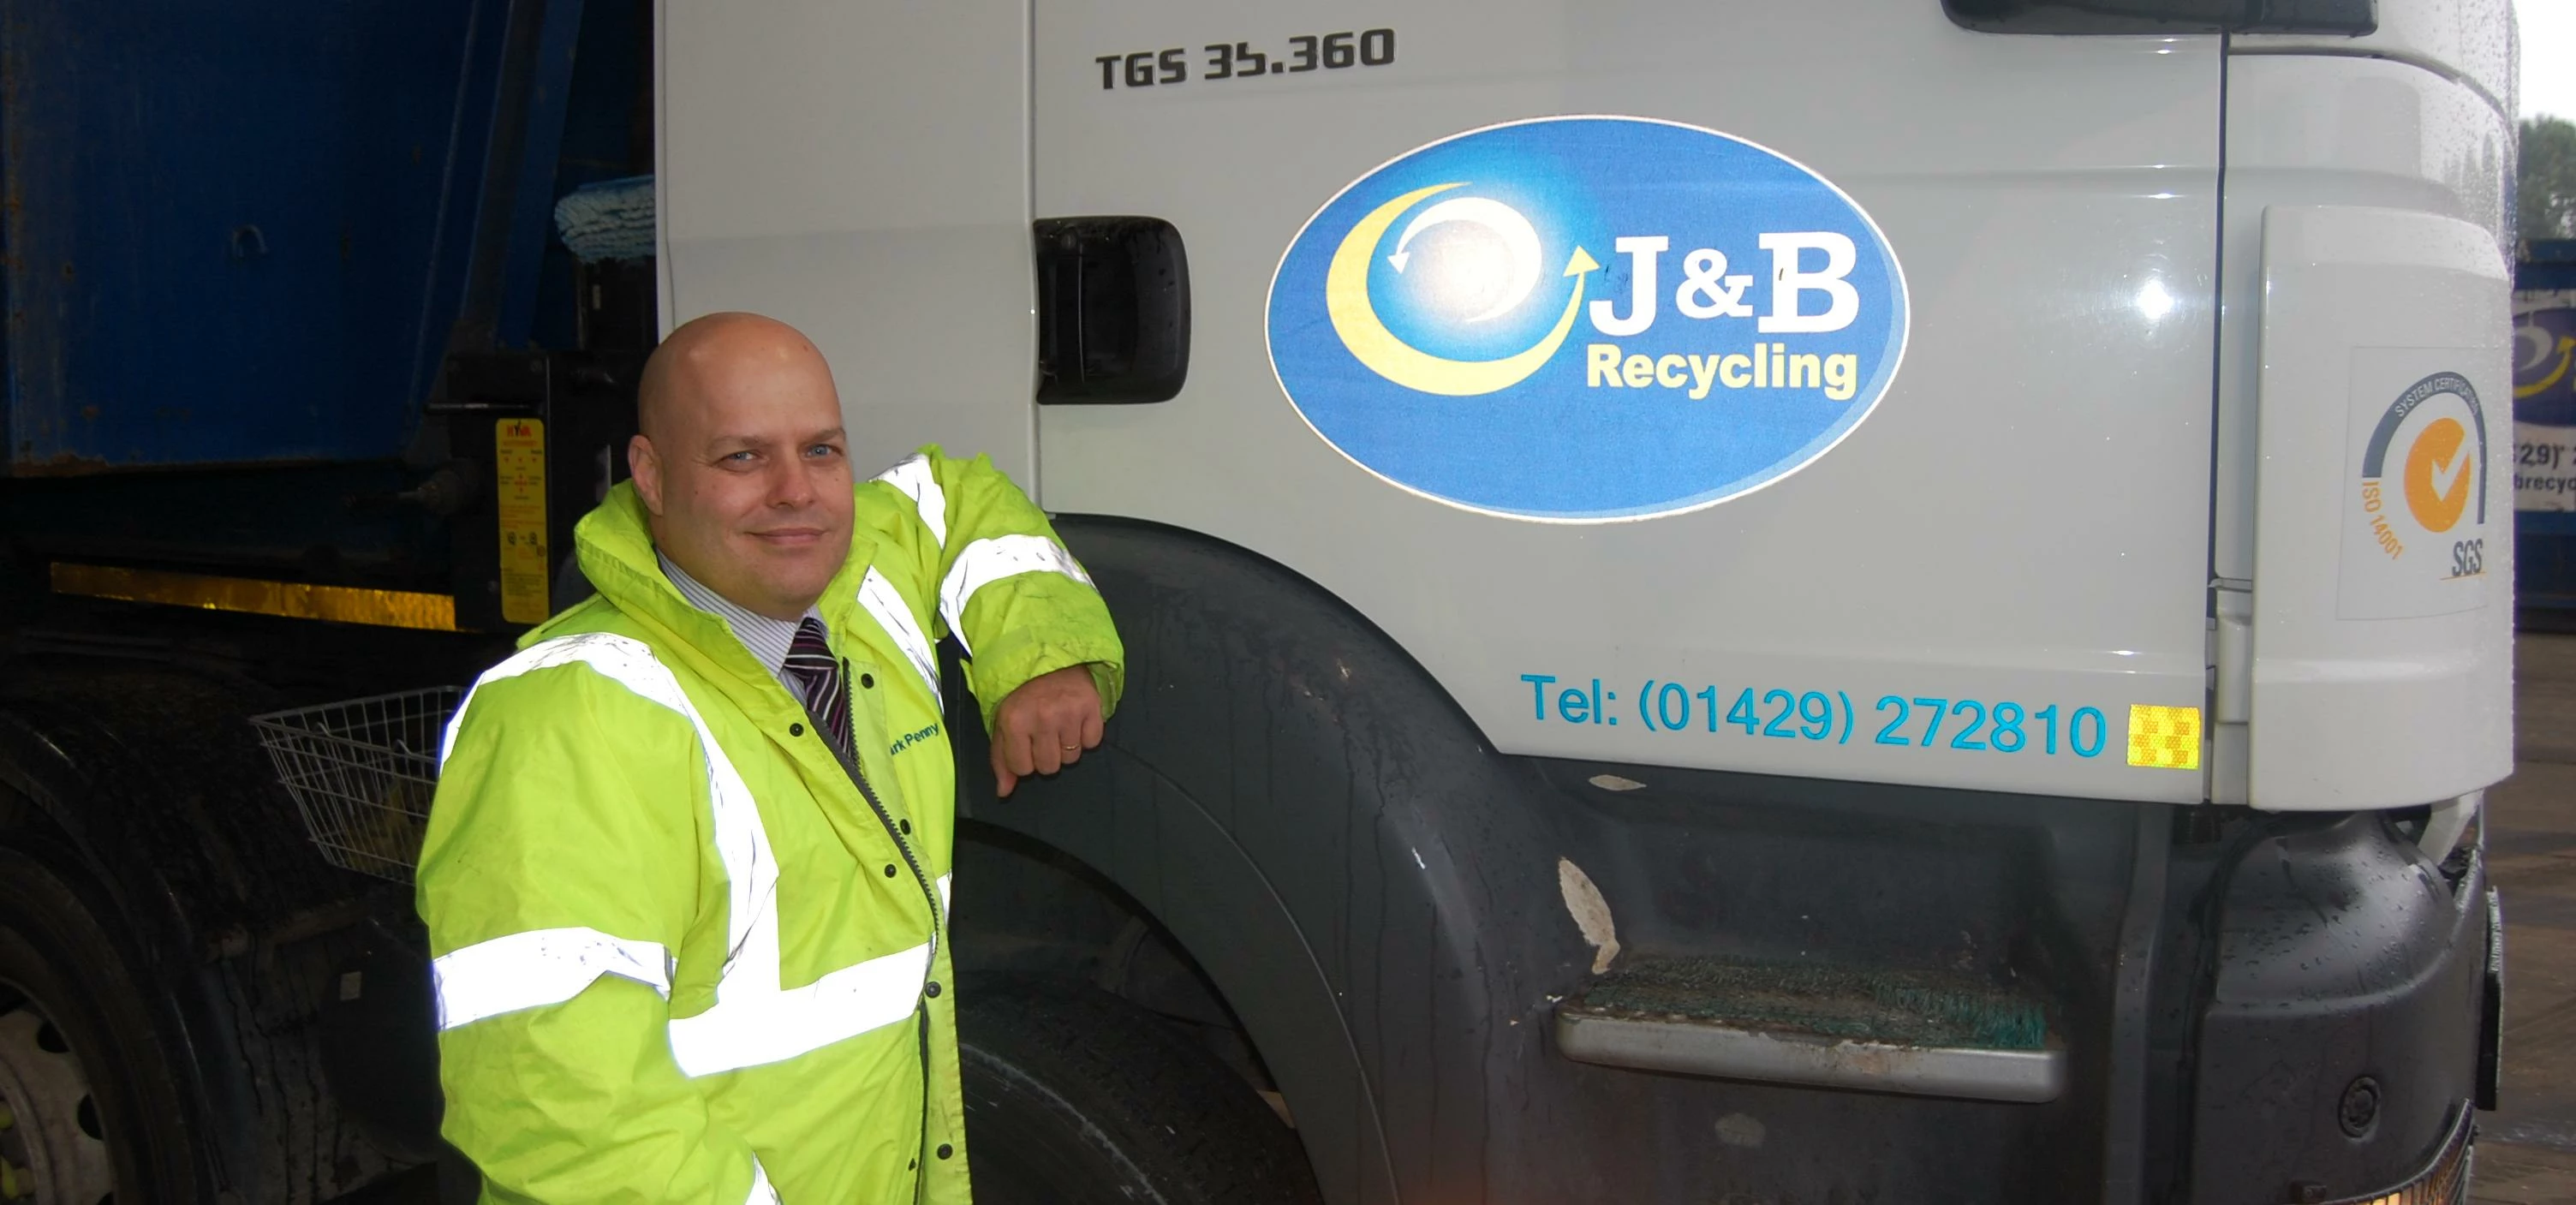 Mark Penny, Commercial Manager at J&B Recycling